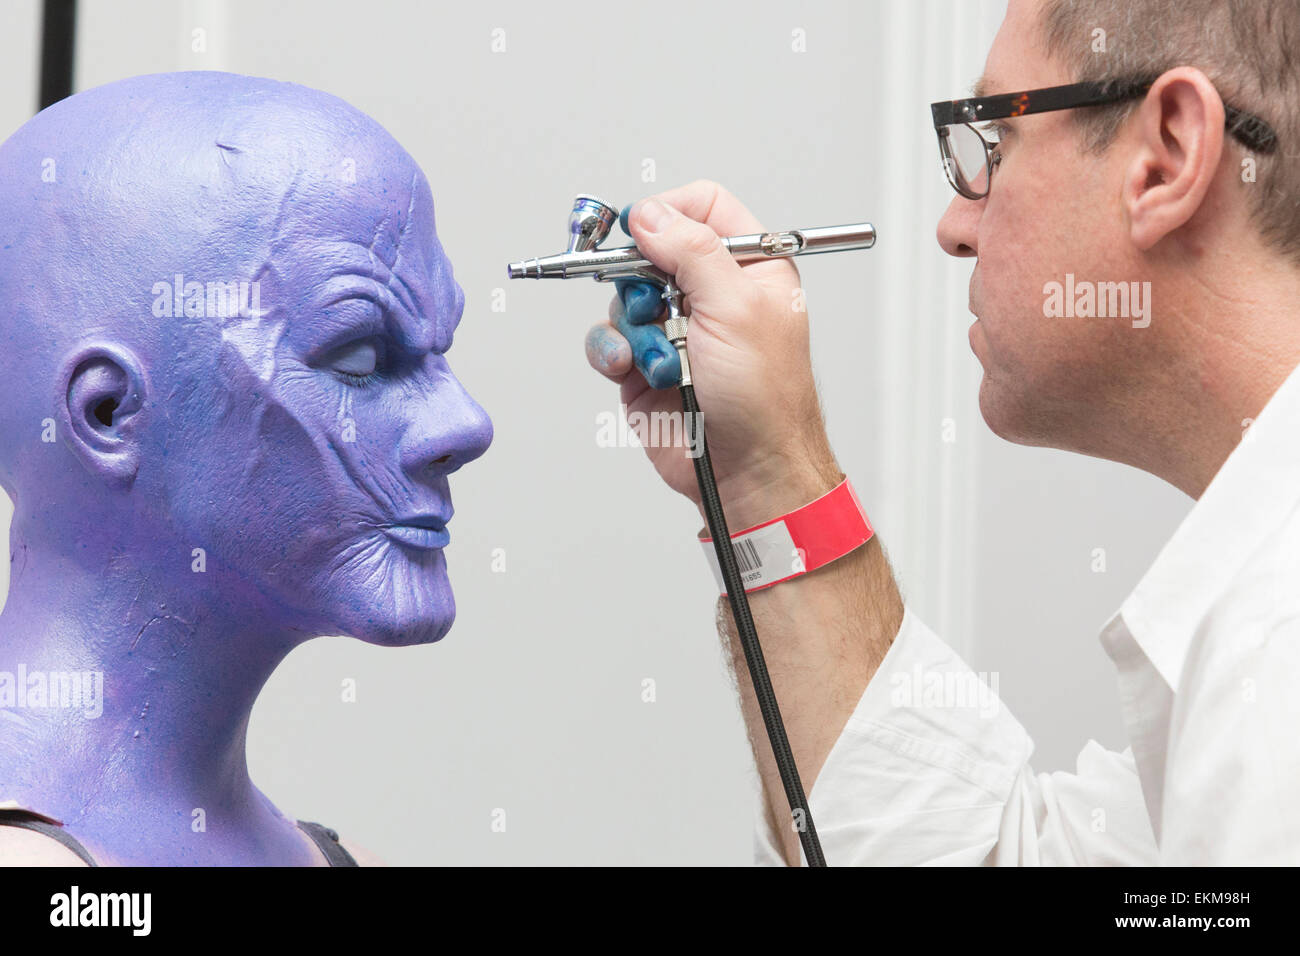 London, UK. 12 April 2015. Makeup Artist Chad Washam from Make-up designory  airbrushes makeup to a female version of the Avengers' villain Thanos.  United Makeup Artists Expo (UMAe), the UK's leading aspiring